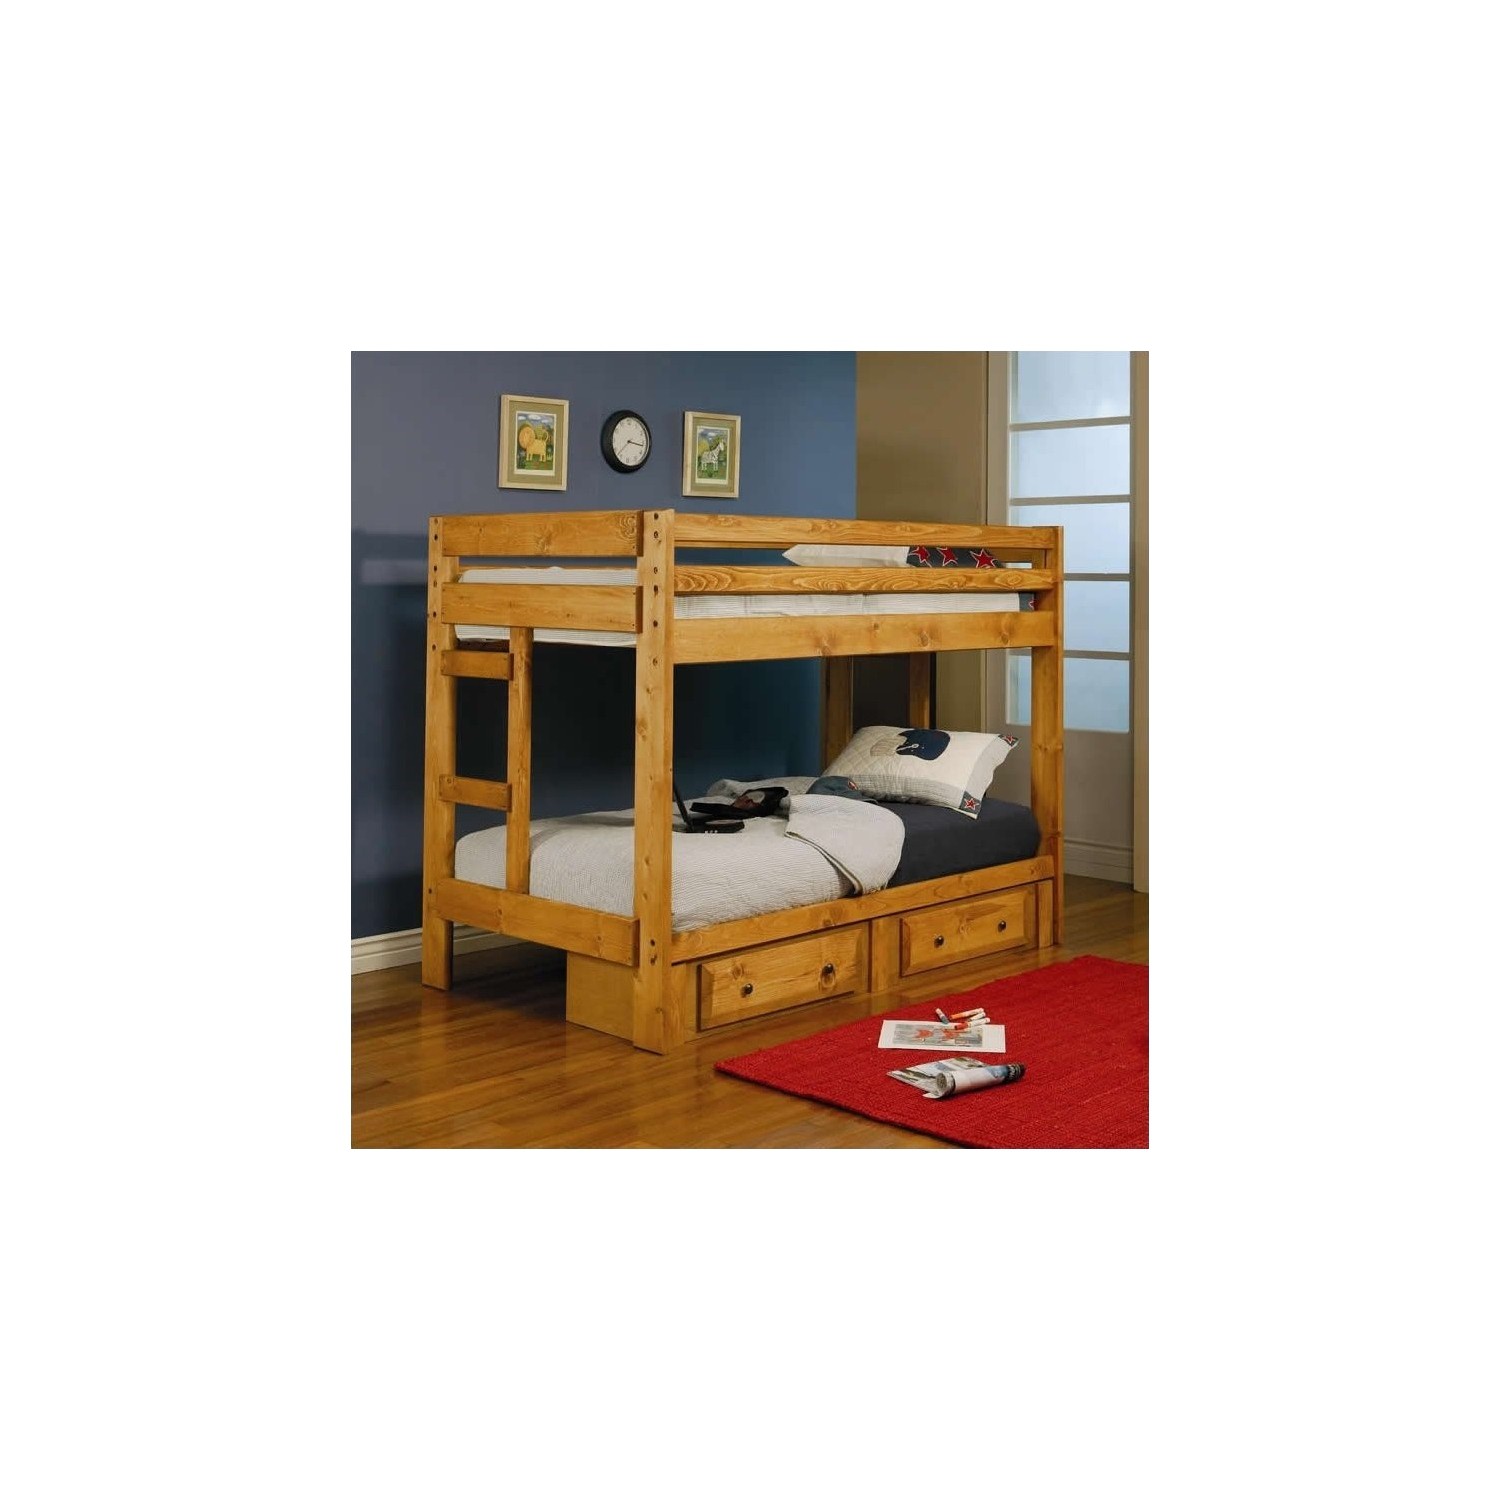 Coaster Wrangle Hill Twin over Twin Rustic Country Bunk Bed - Twin (Single) - Amber Wash Finish